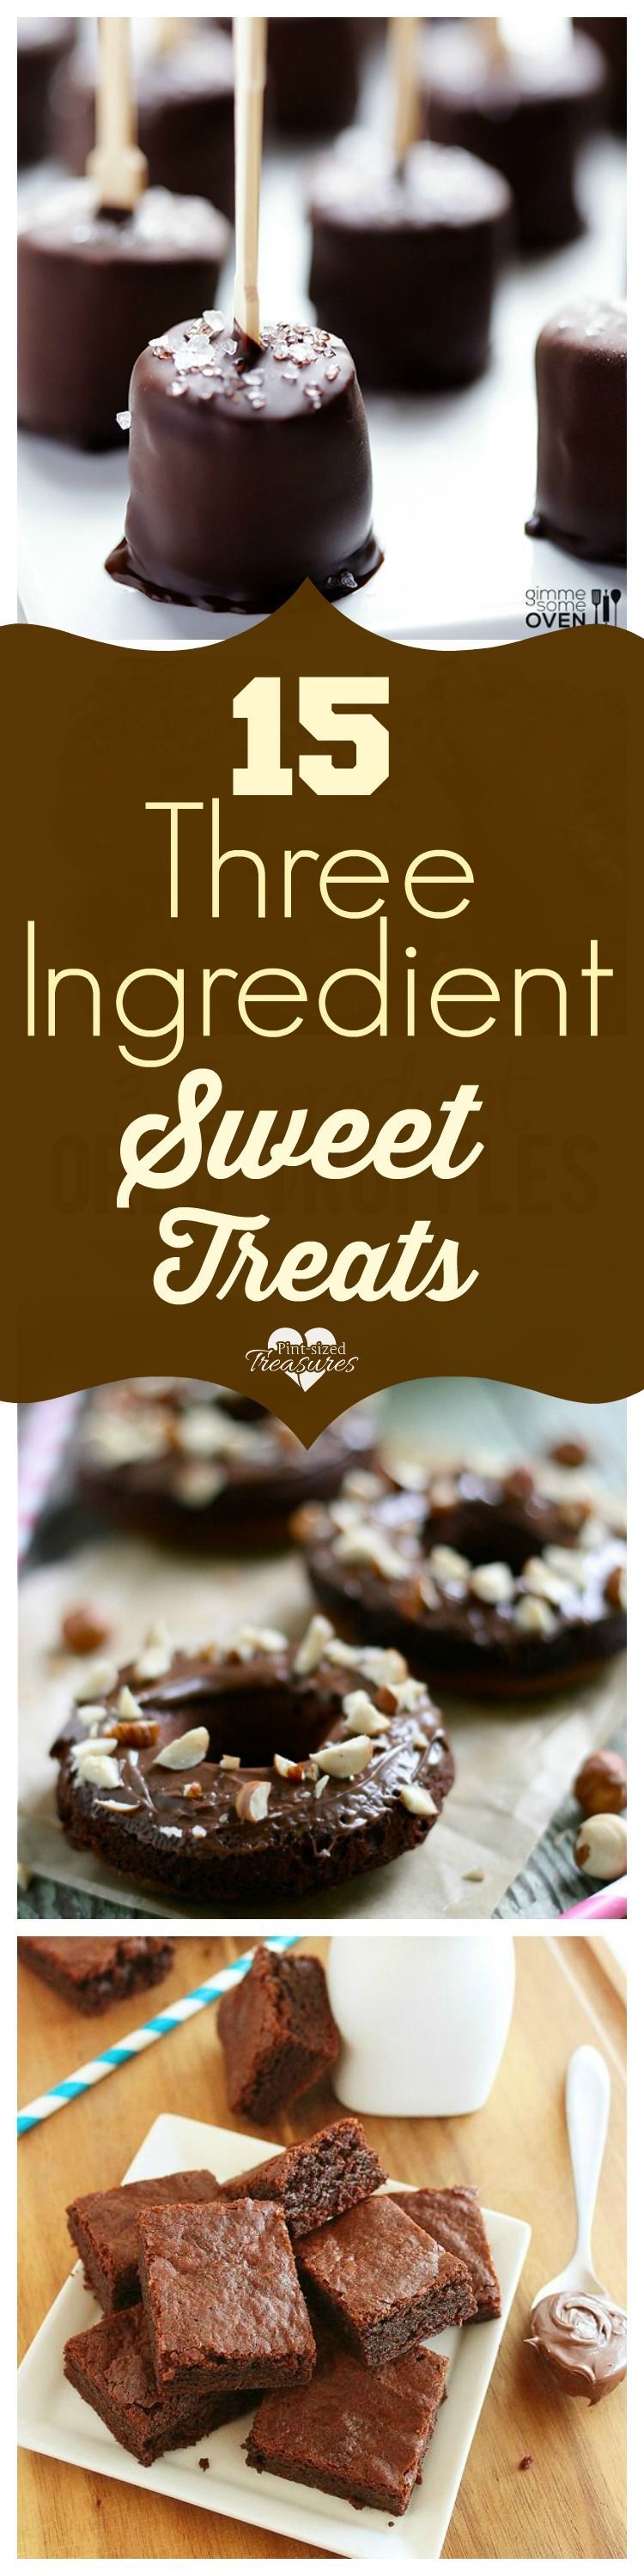 Love easy, sweet treats? These three ingredient treats will make you smile!